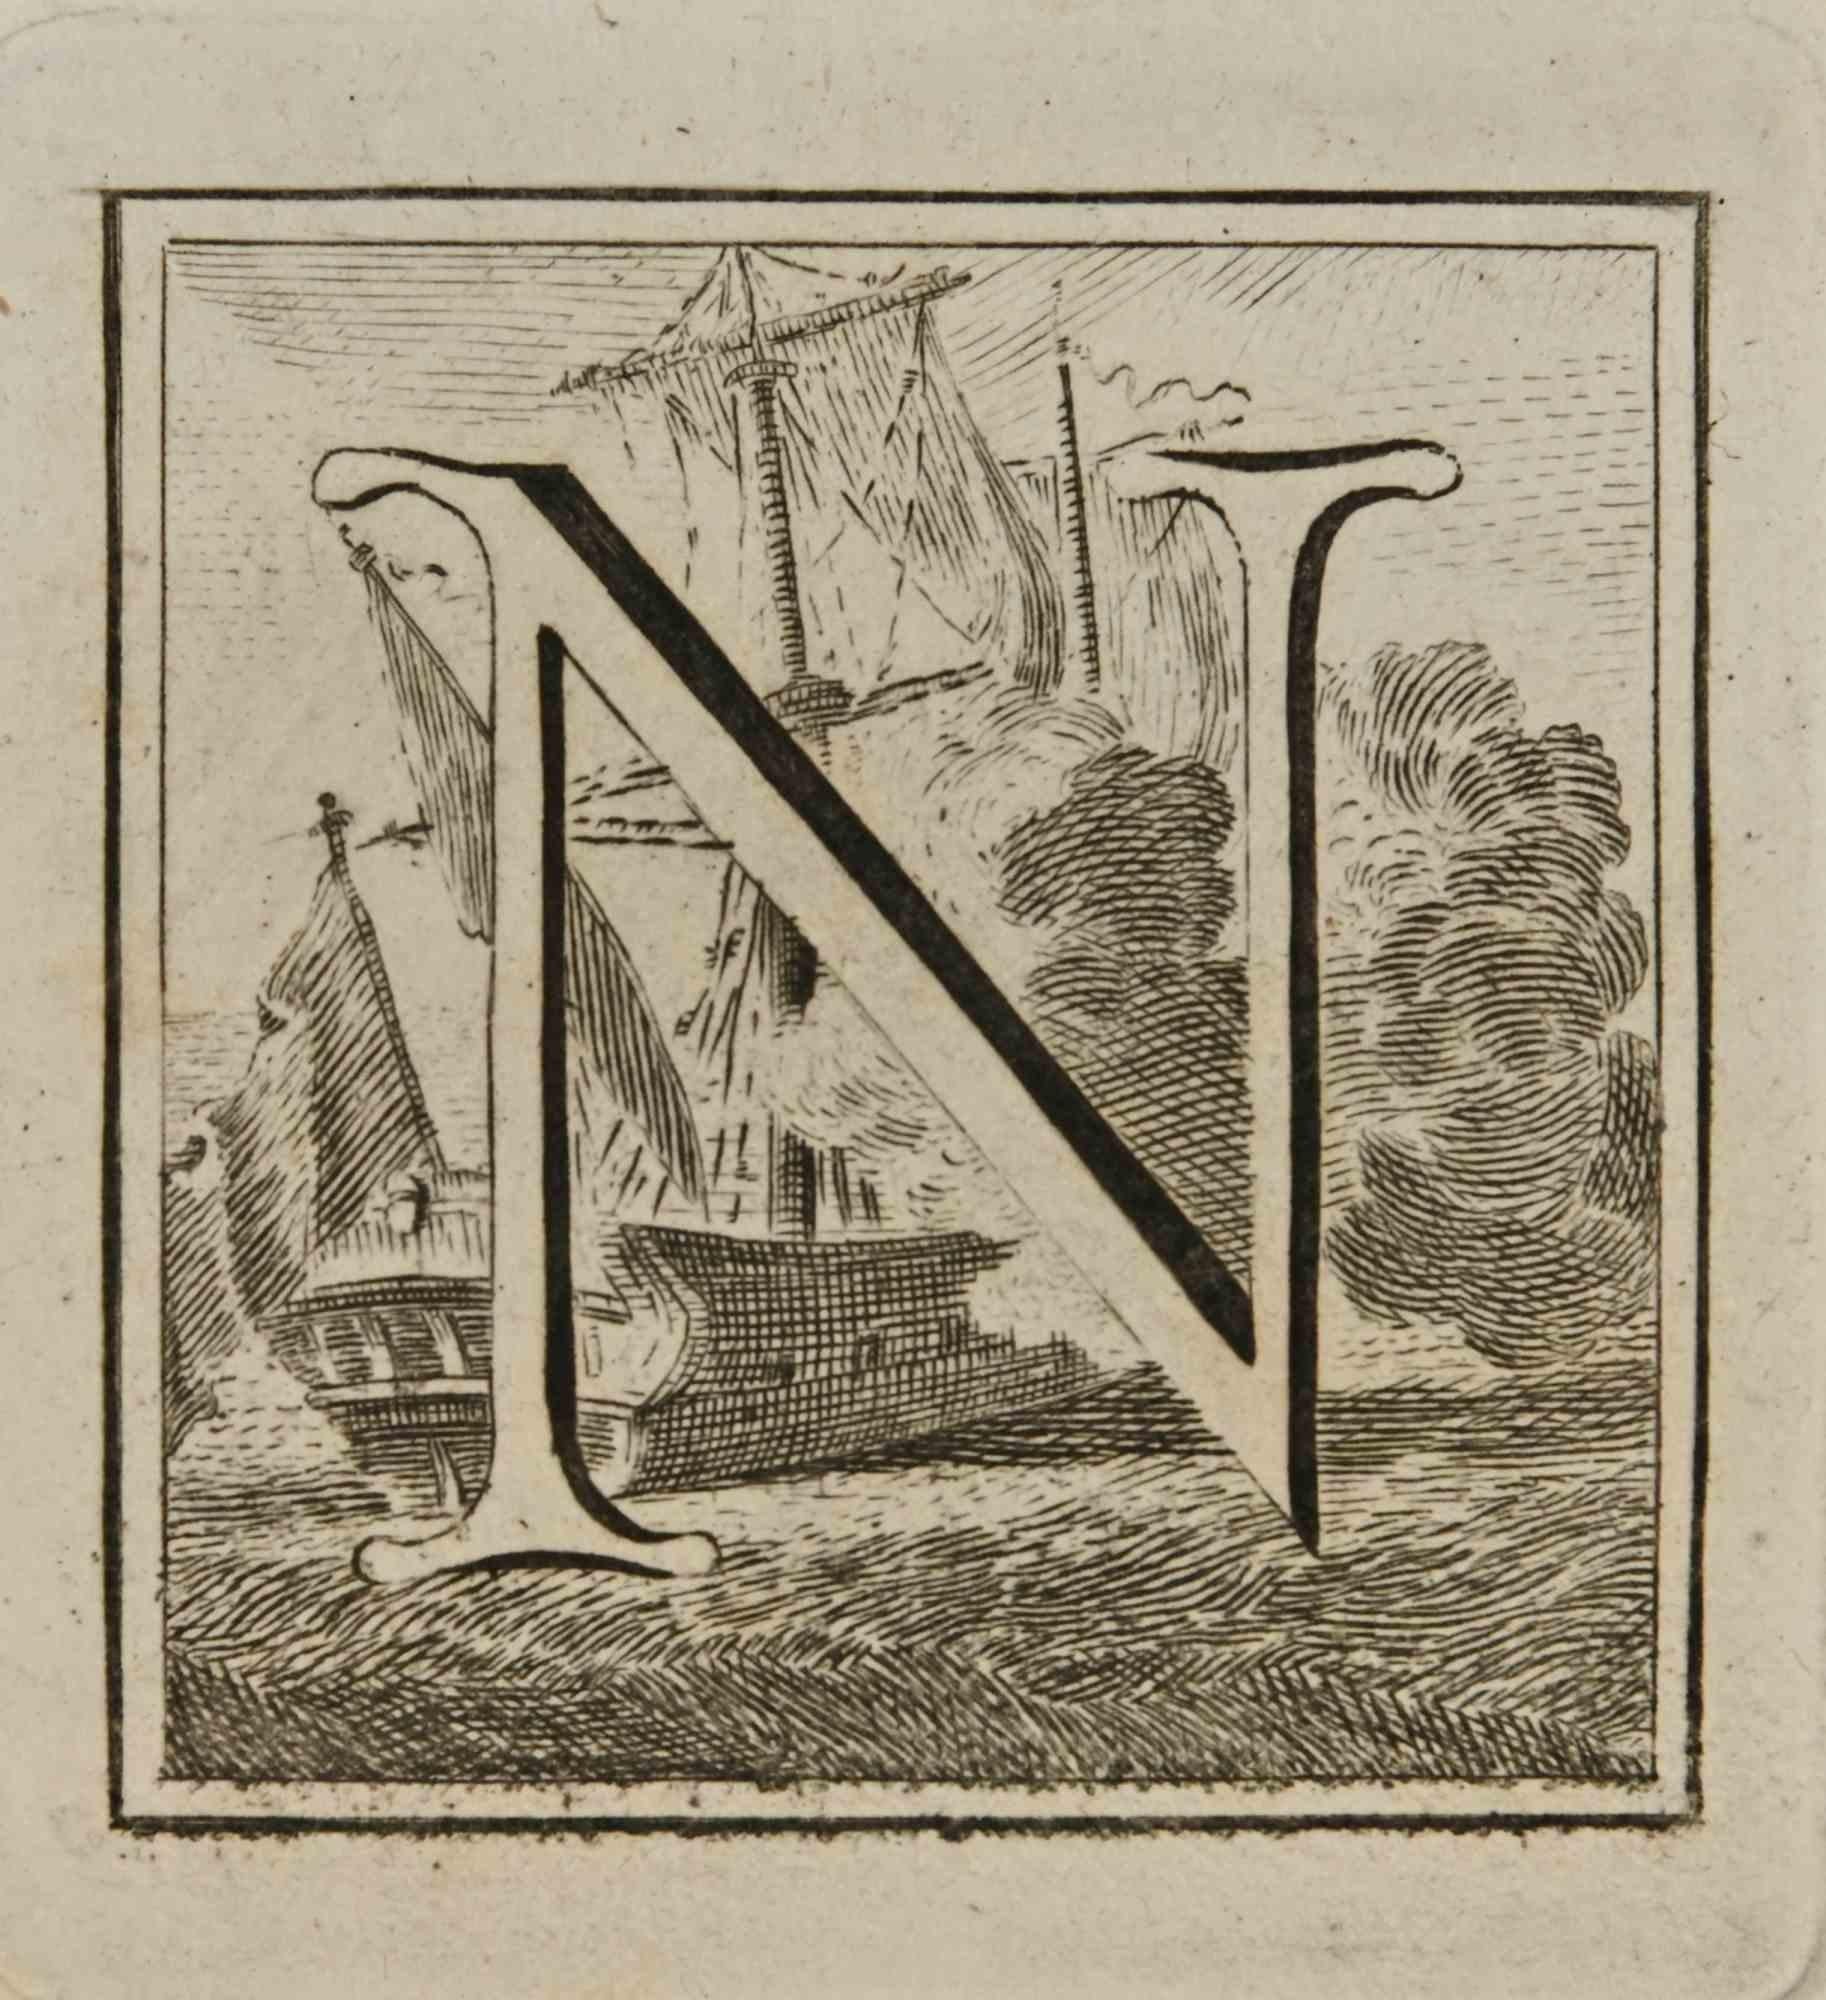 Letter of the Alphabet N from the series "Antiquities of Herculaneum", is an etching on paper realized by Luigi Vanvitelli in the 18th century.

Good conditions with some foxing.

The etching belongs to the print suite “Antiquities of Herculaneum